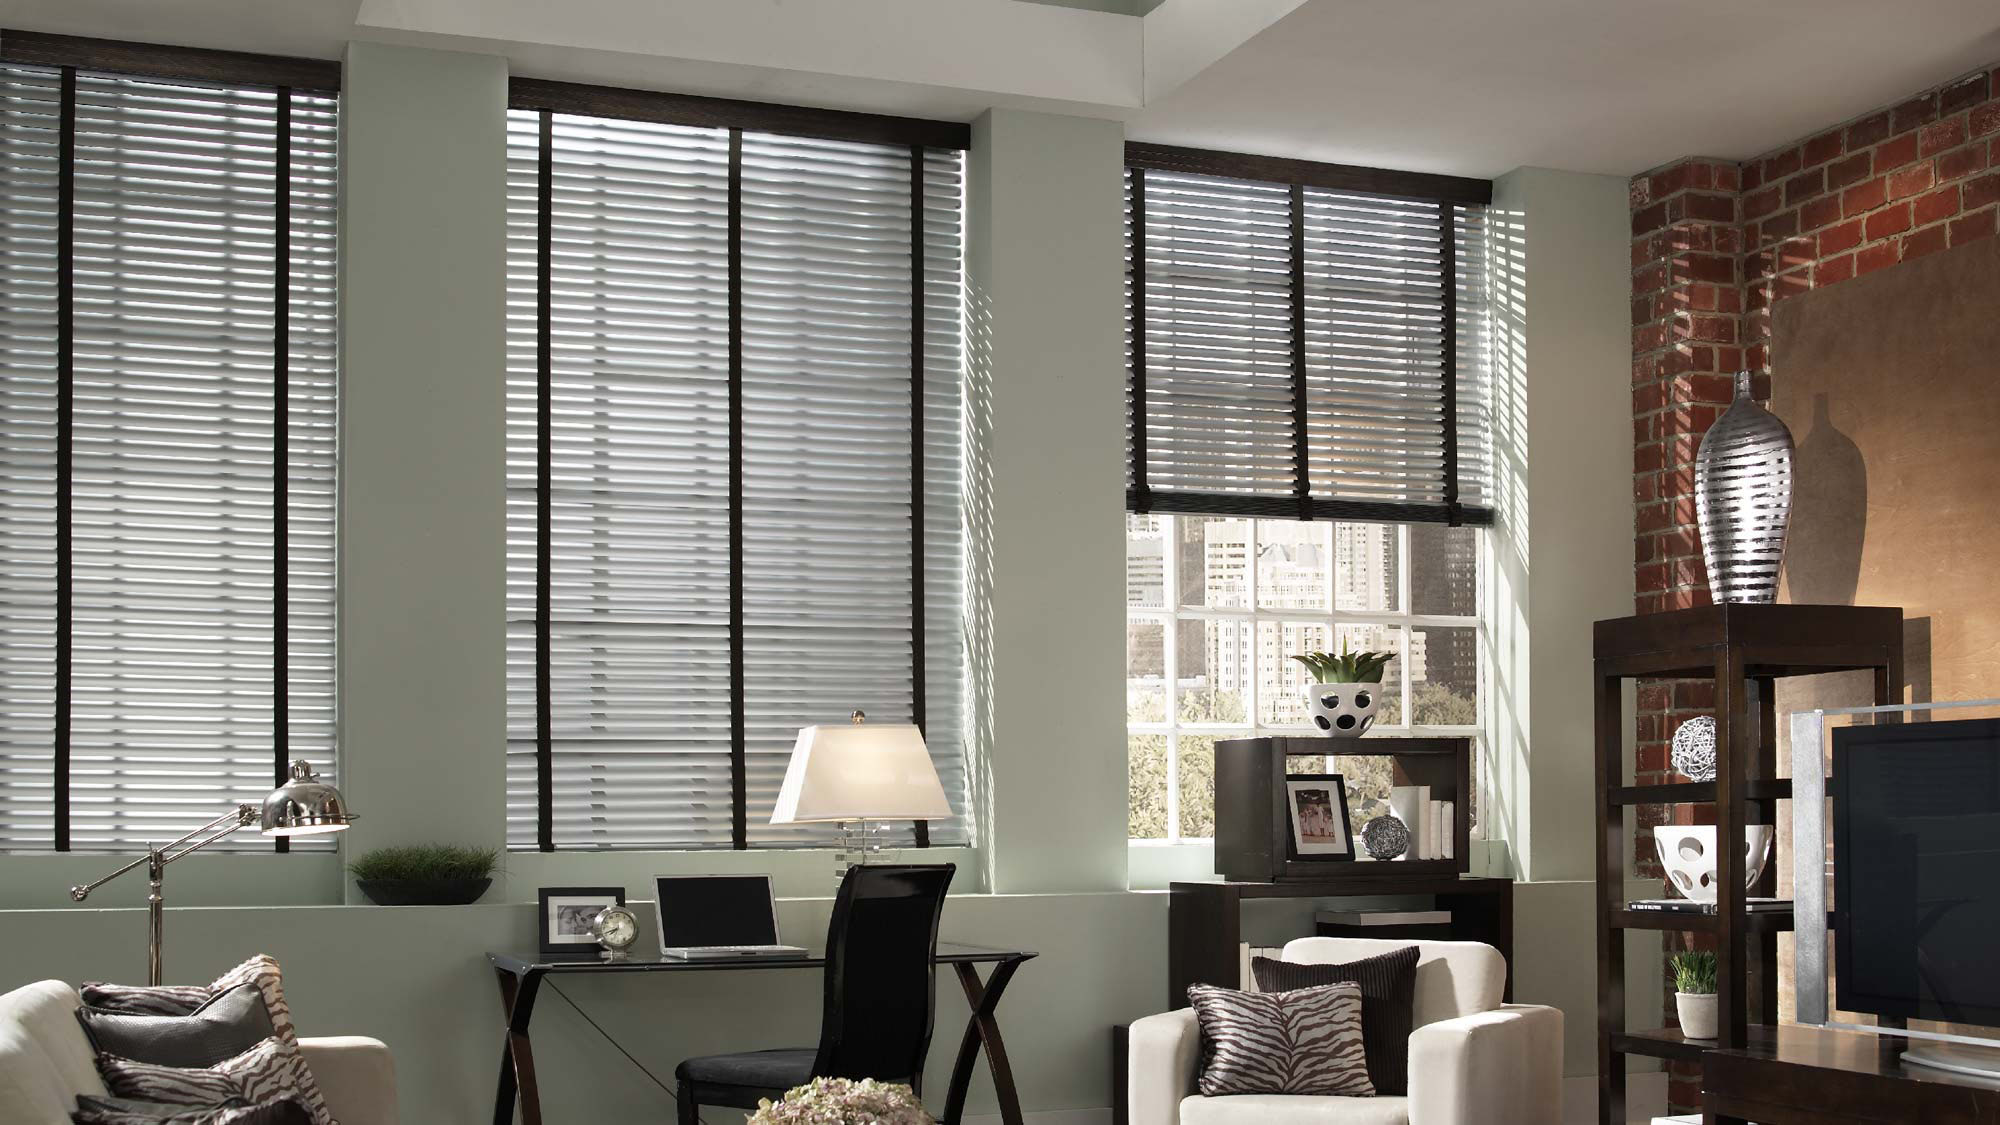 Dark Classic Collection® Aluminum Blinds with Embellishment Trim Banding in an office with a chair that has Interior Masterpieces® Custom Pillows